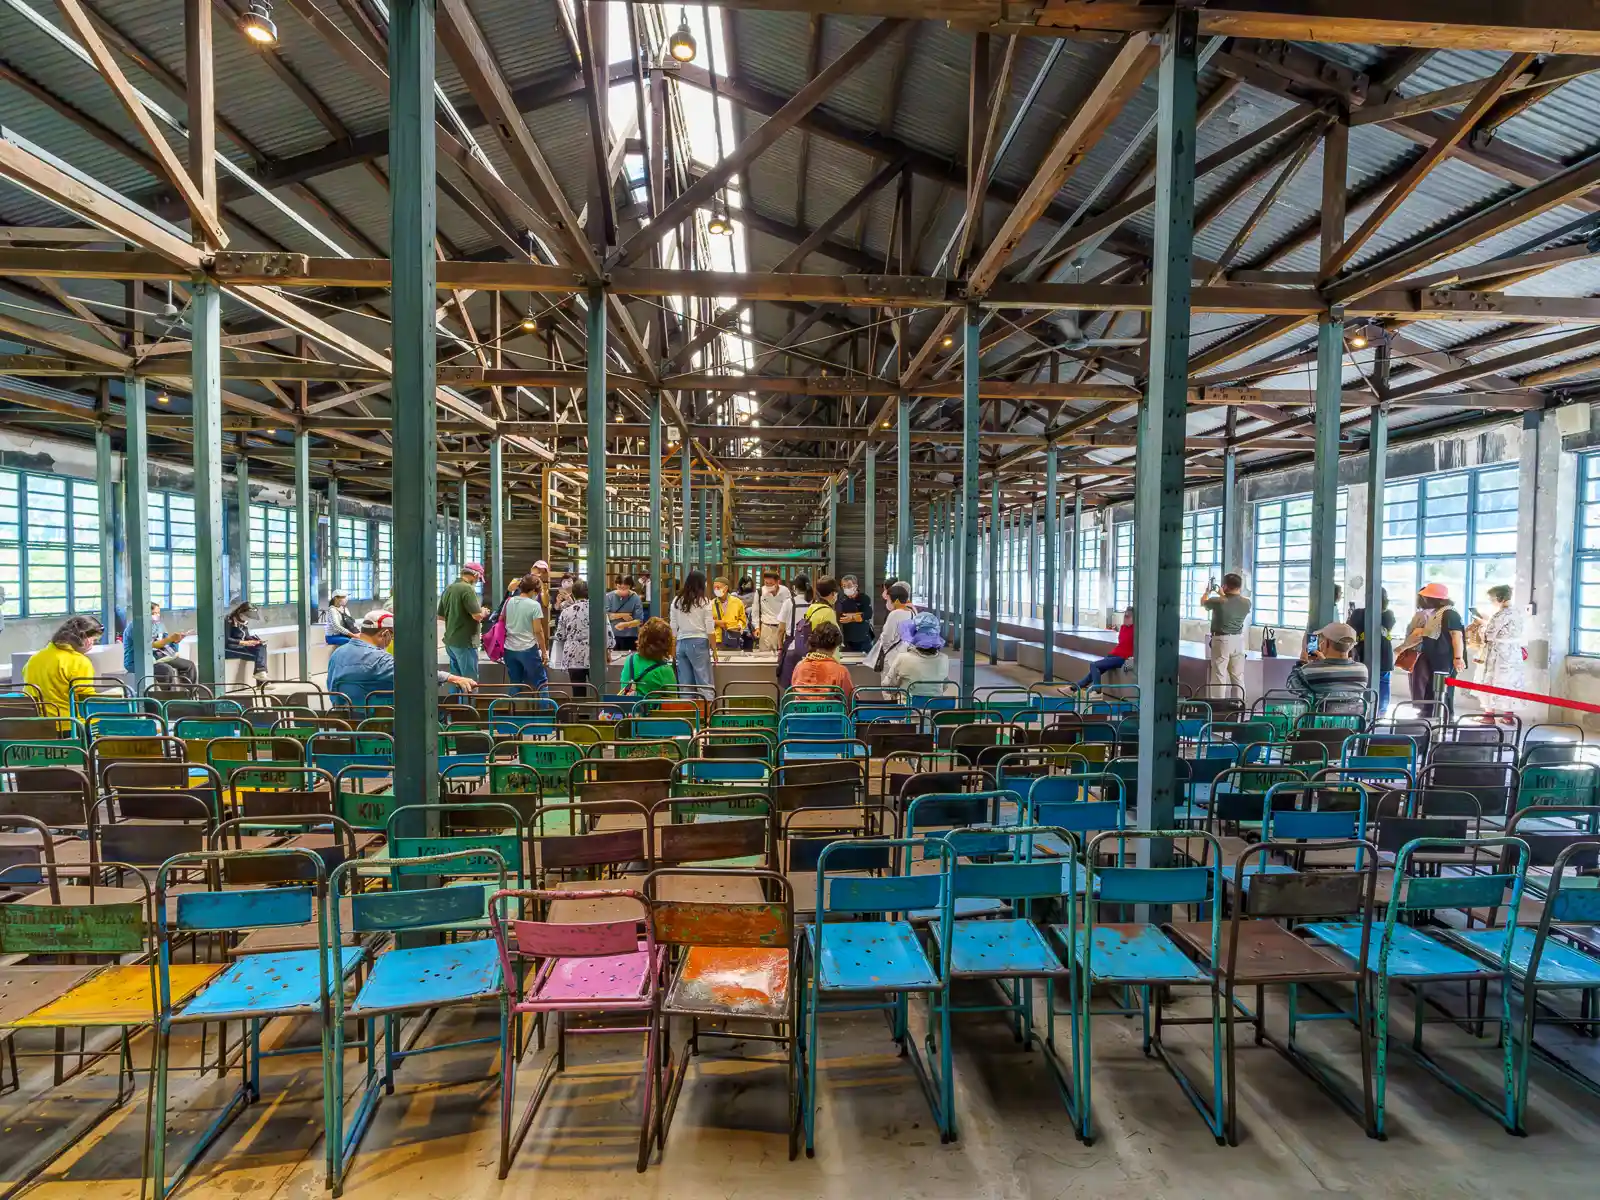 Rows of painted aluminum chairs are placed facing a central table on the airy second floor of the Daxi Tea Factory.